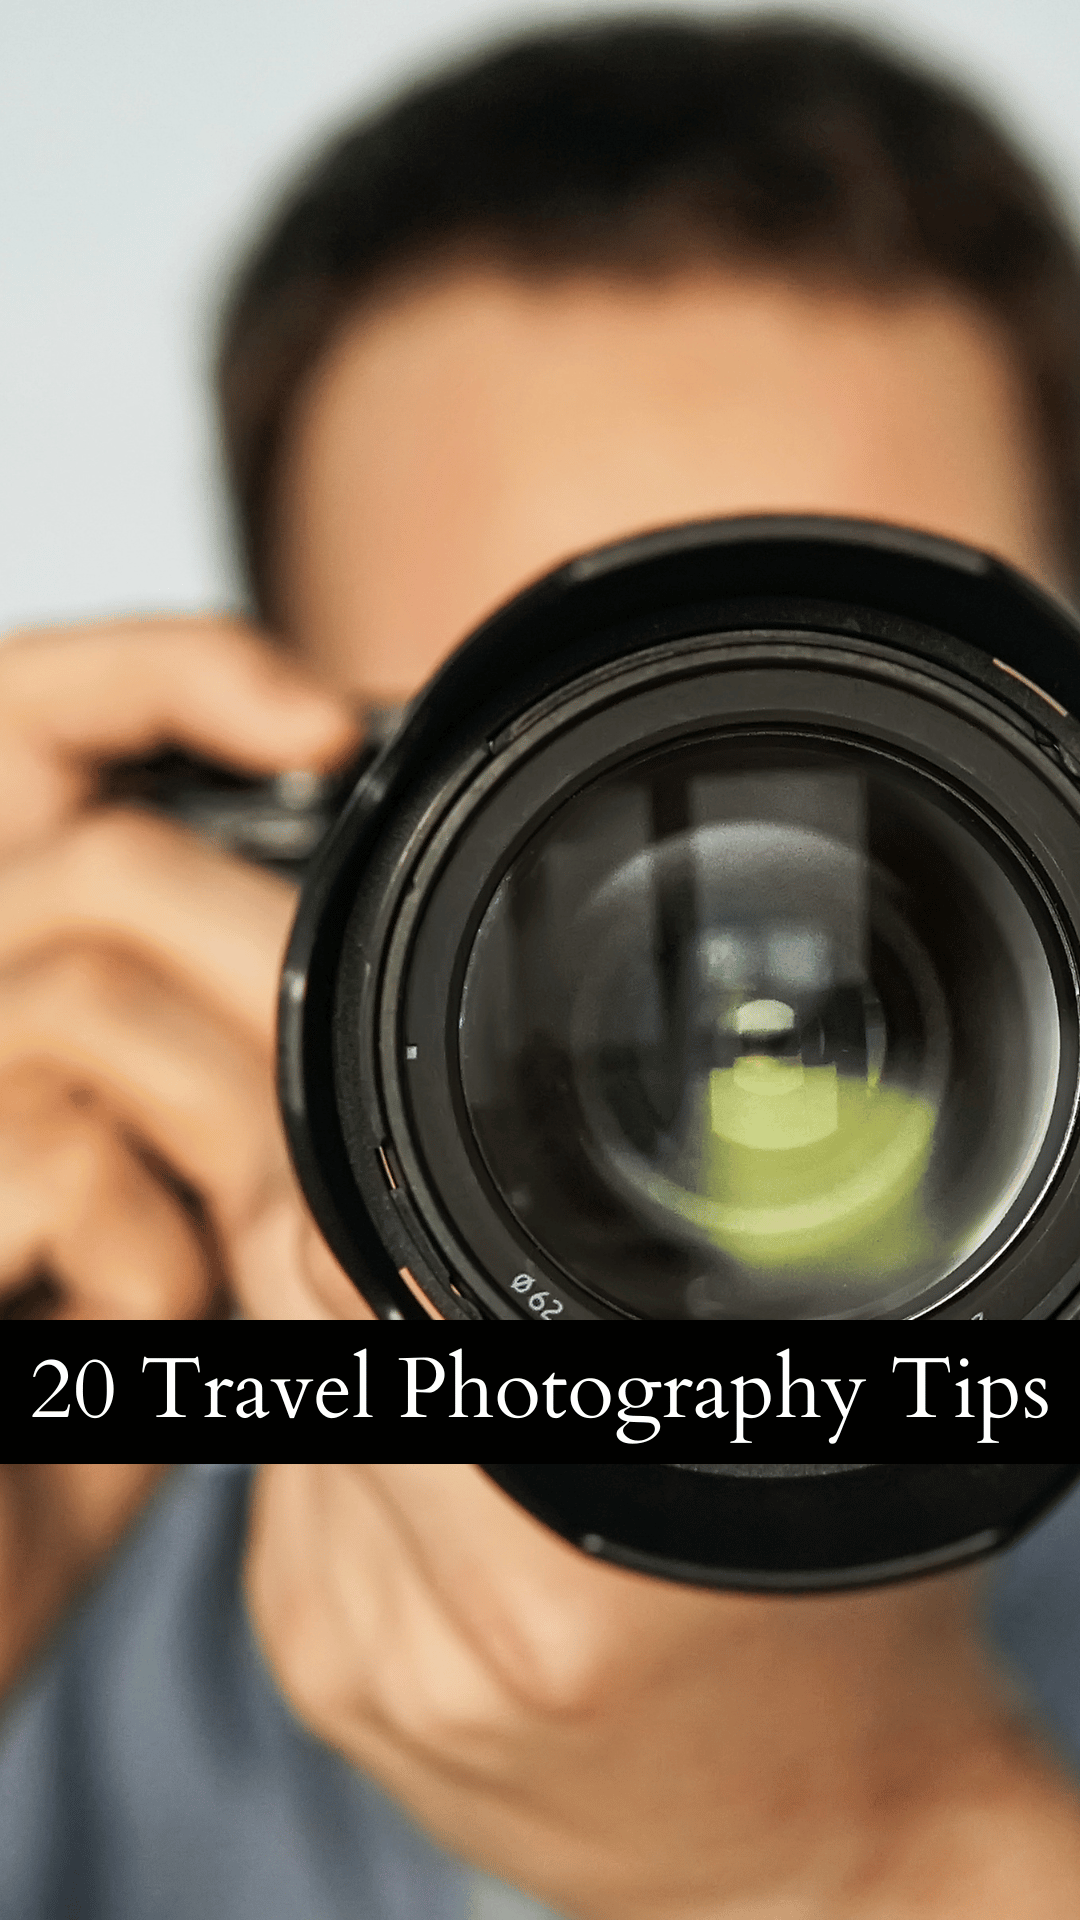 20 Travel Photography Tips